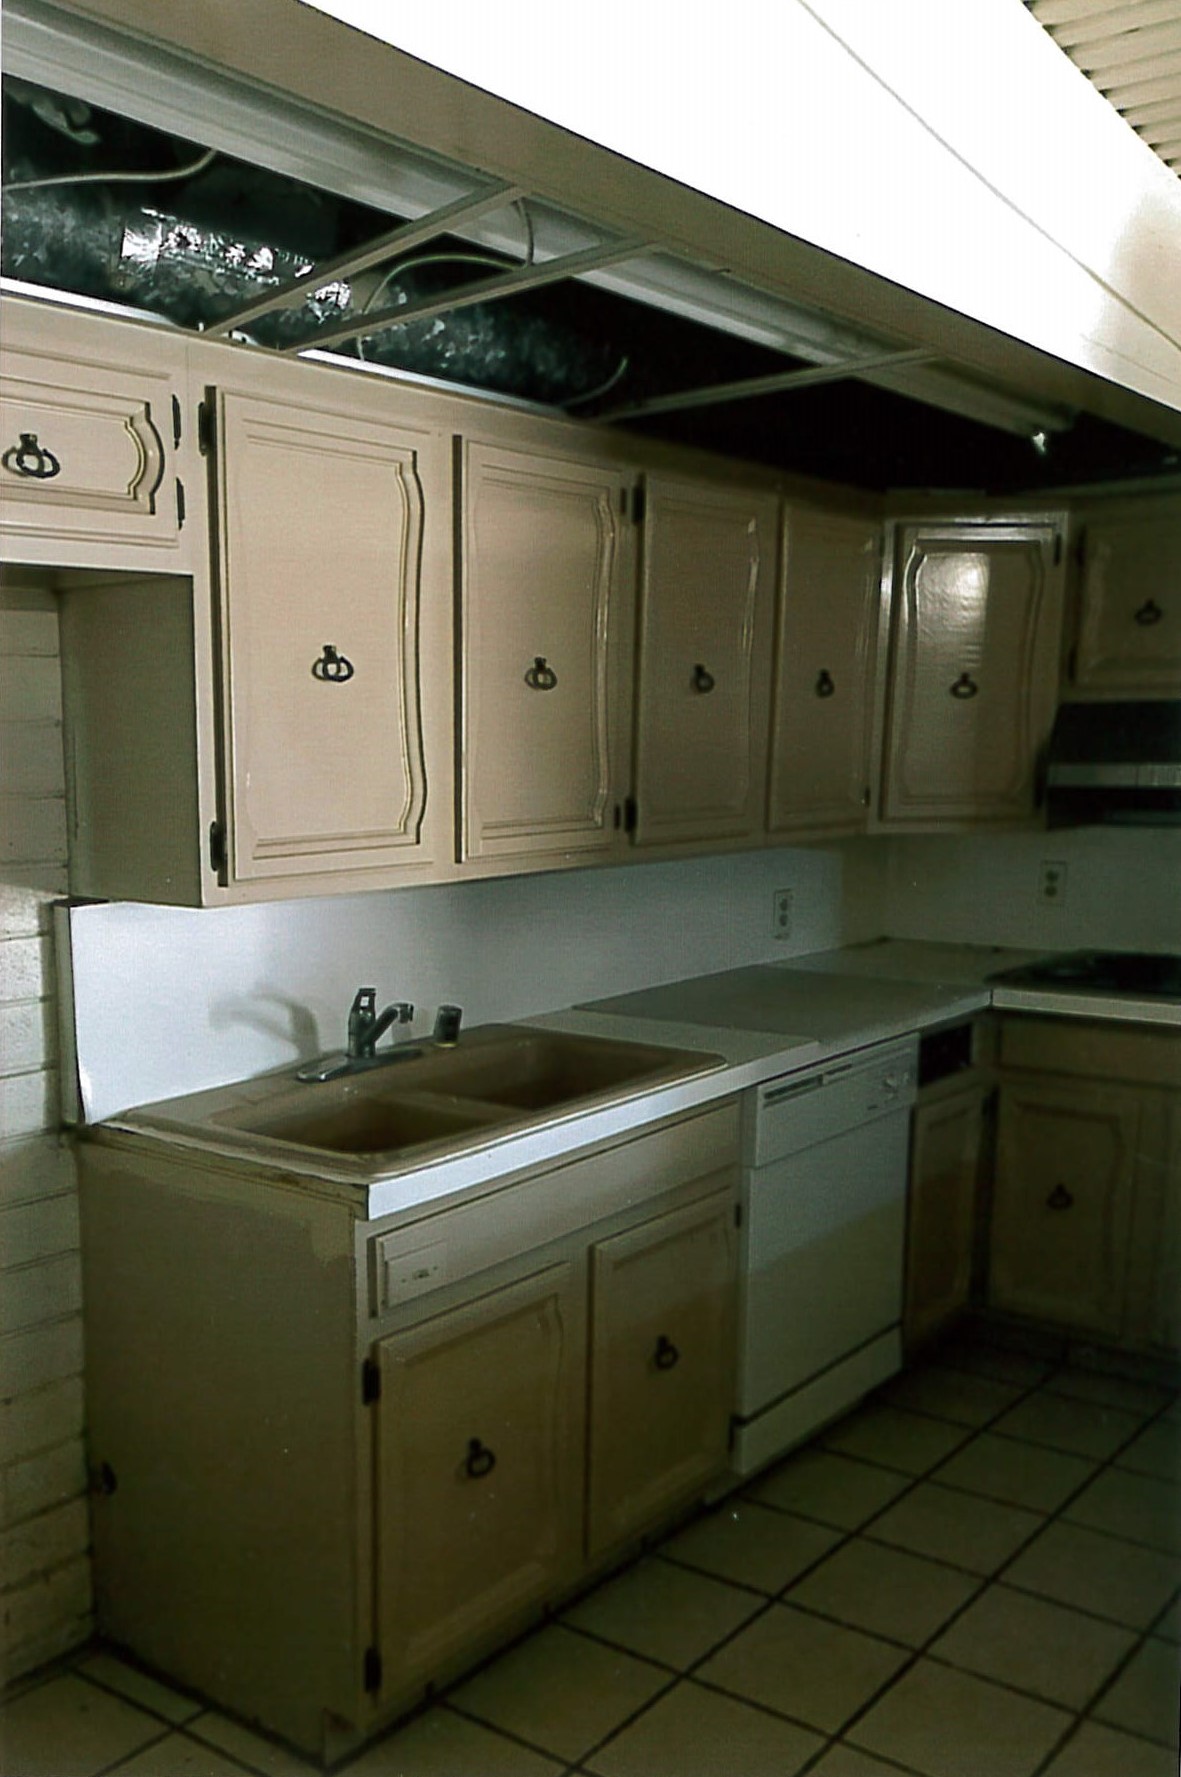 Kitchen showing non-original cabinetry